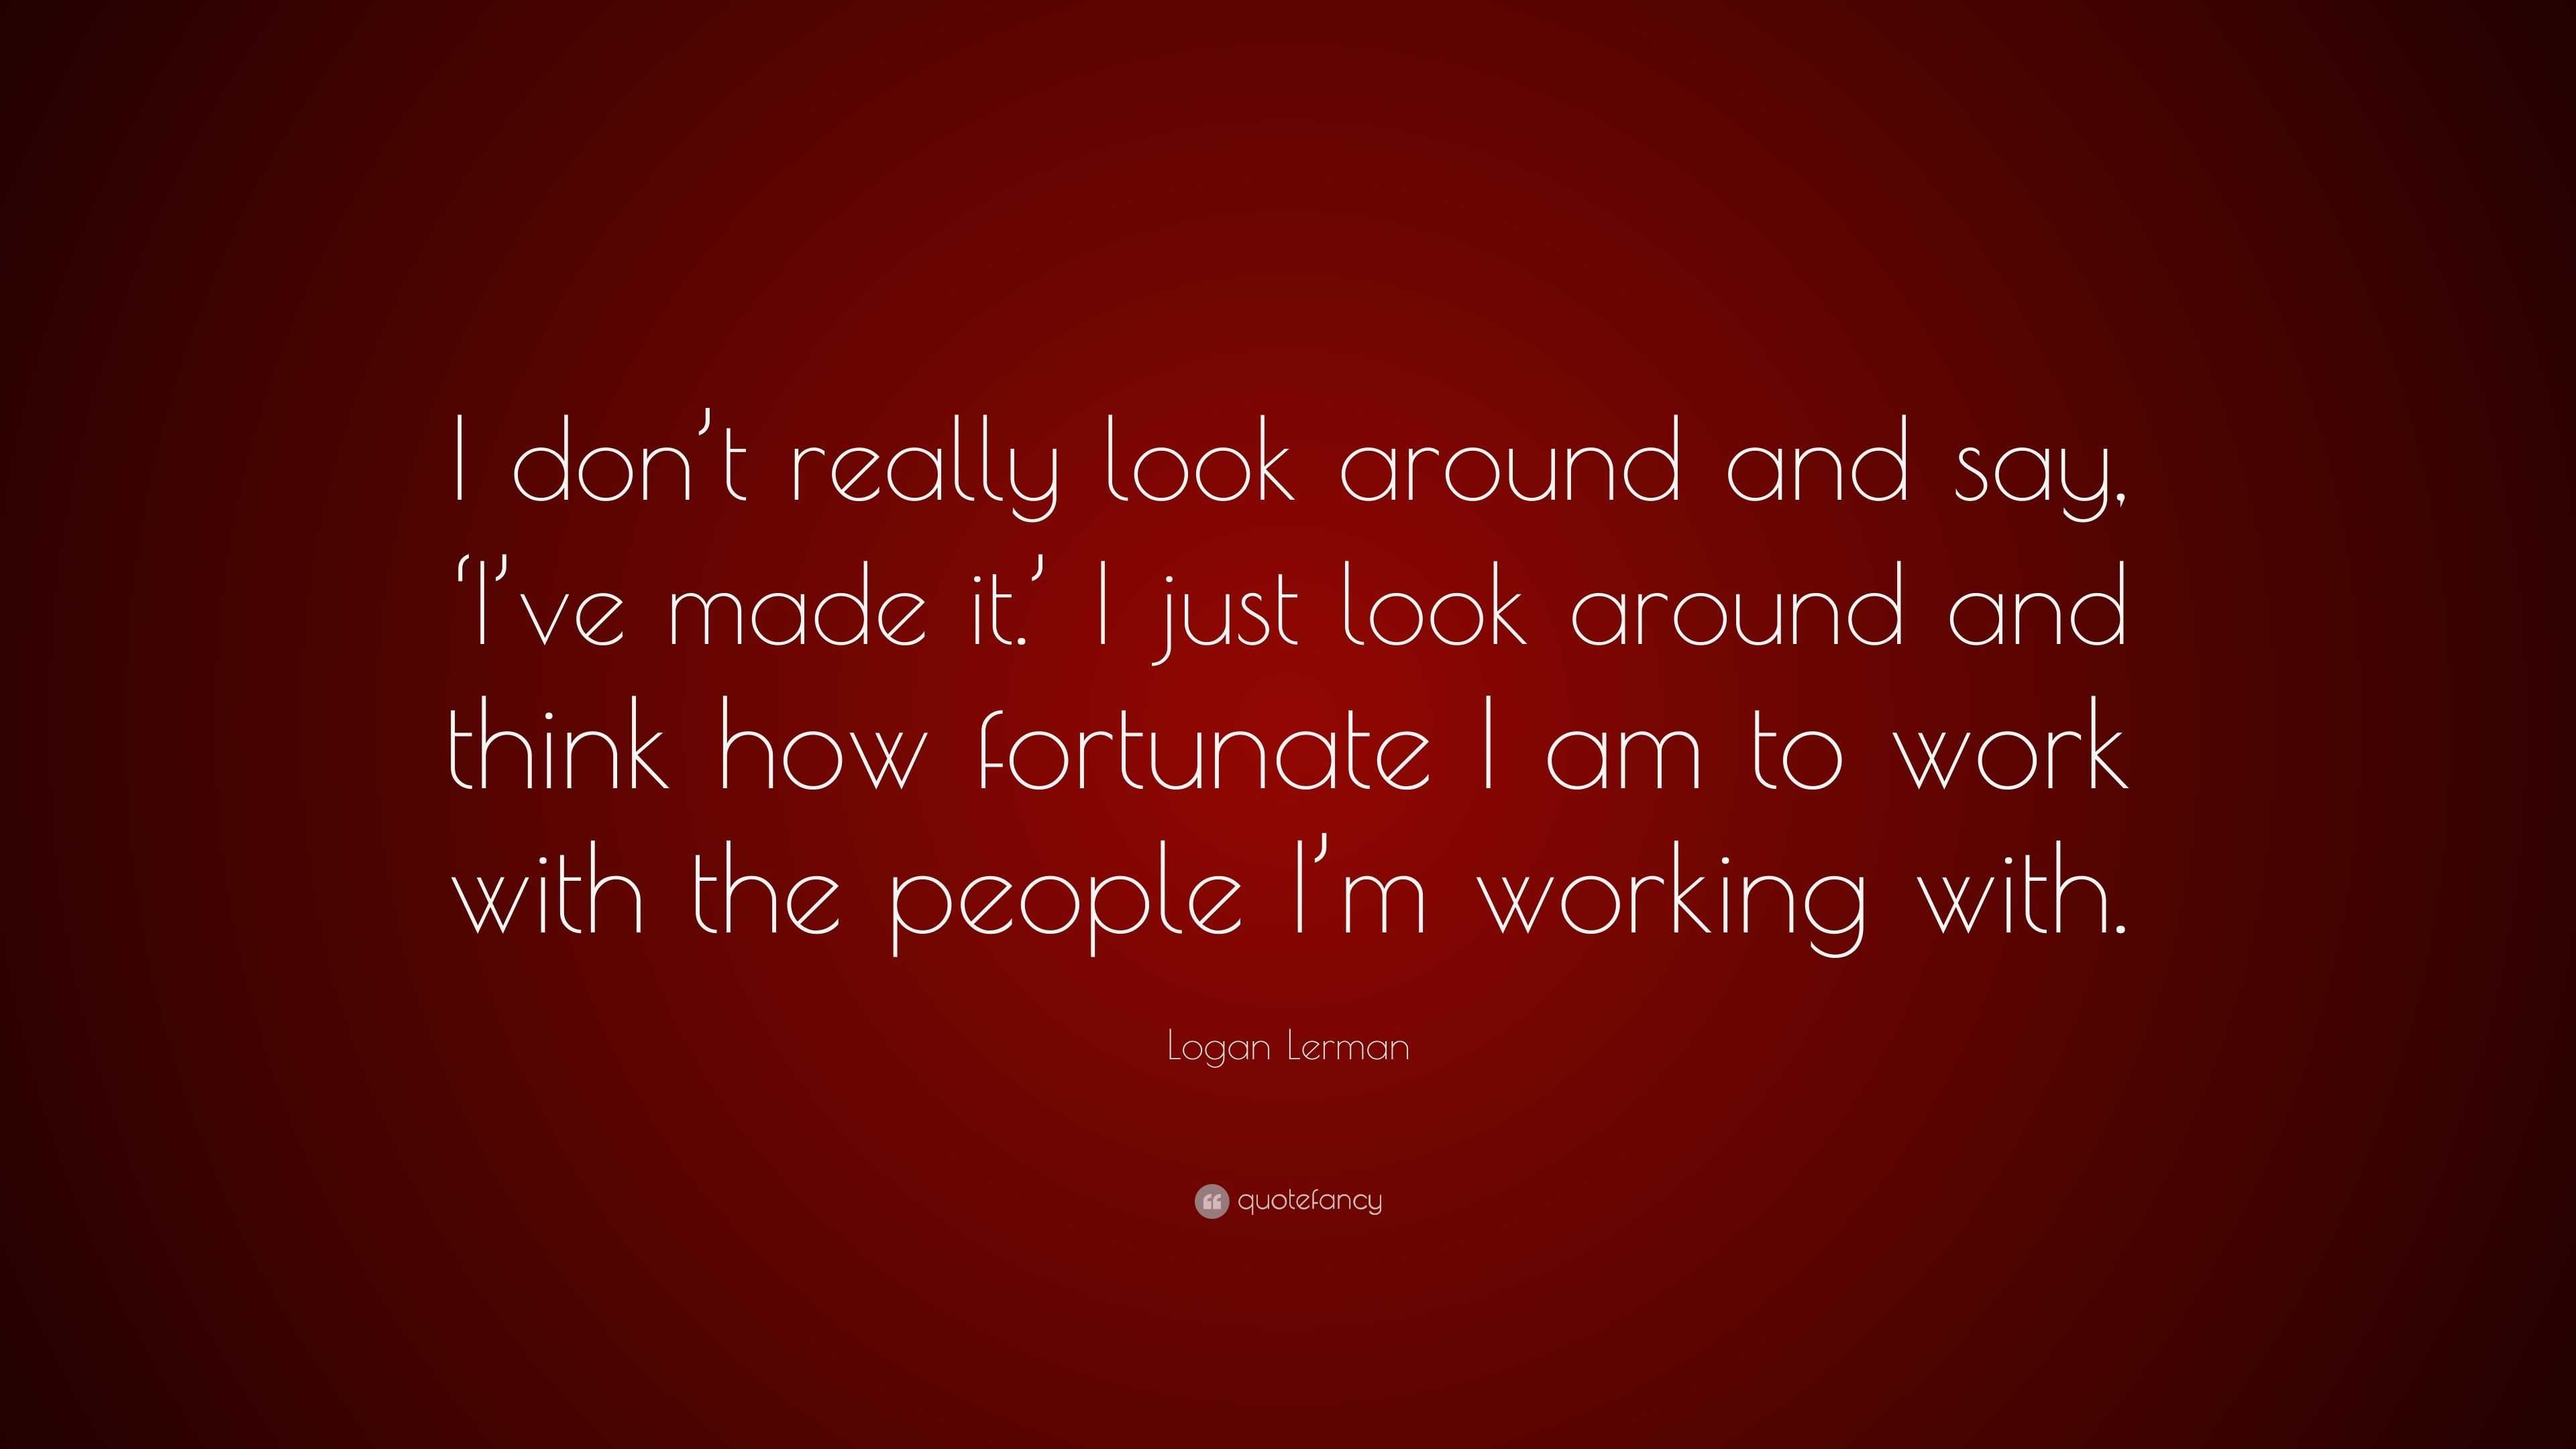 Logan Lerman Quote: “I don't really look around and say